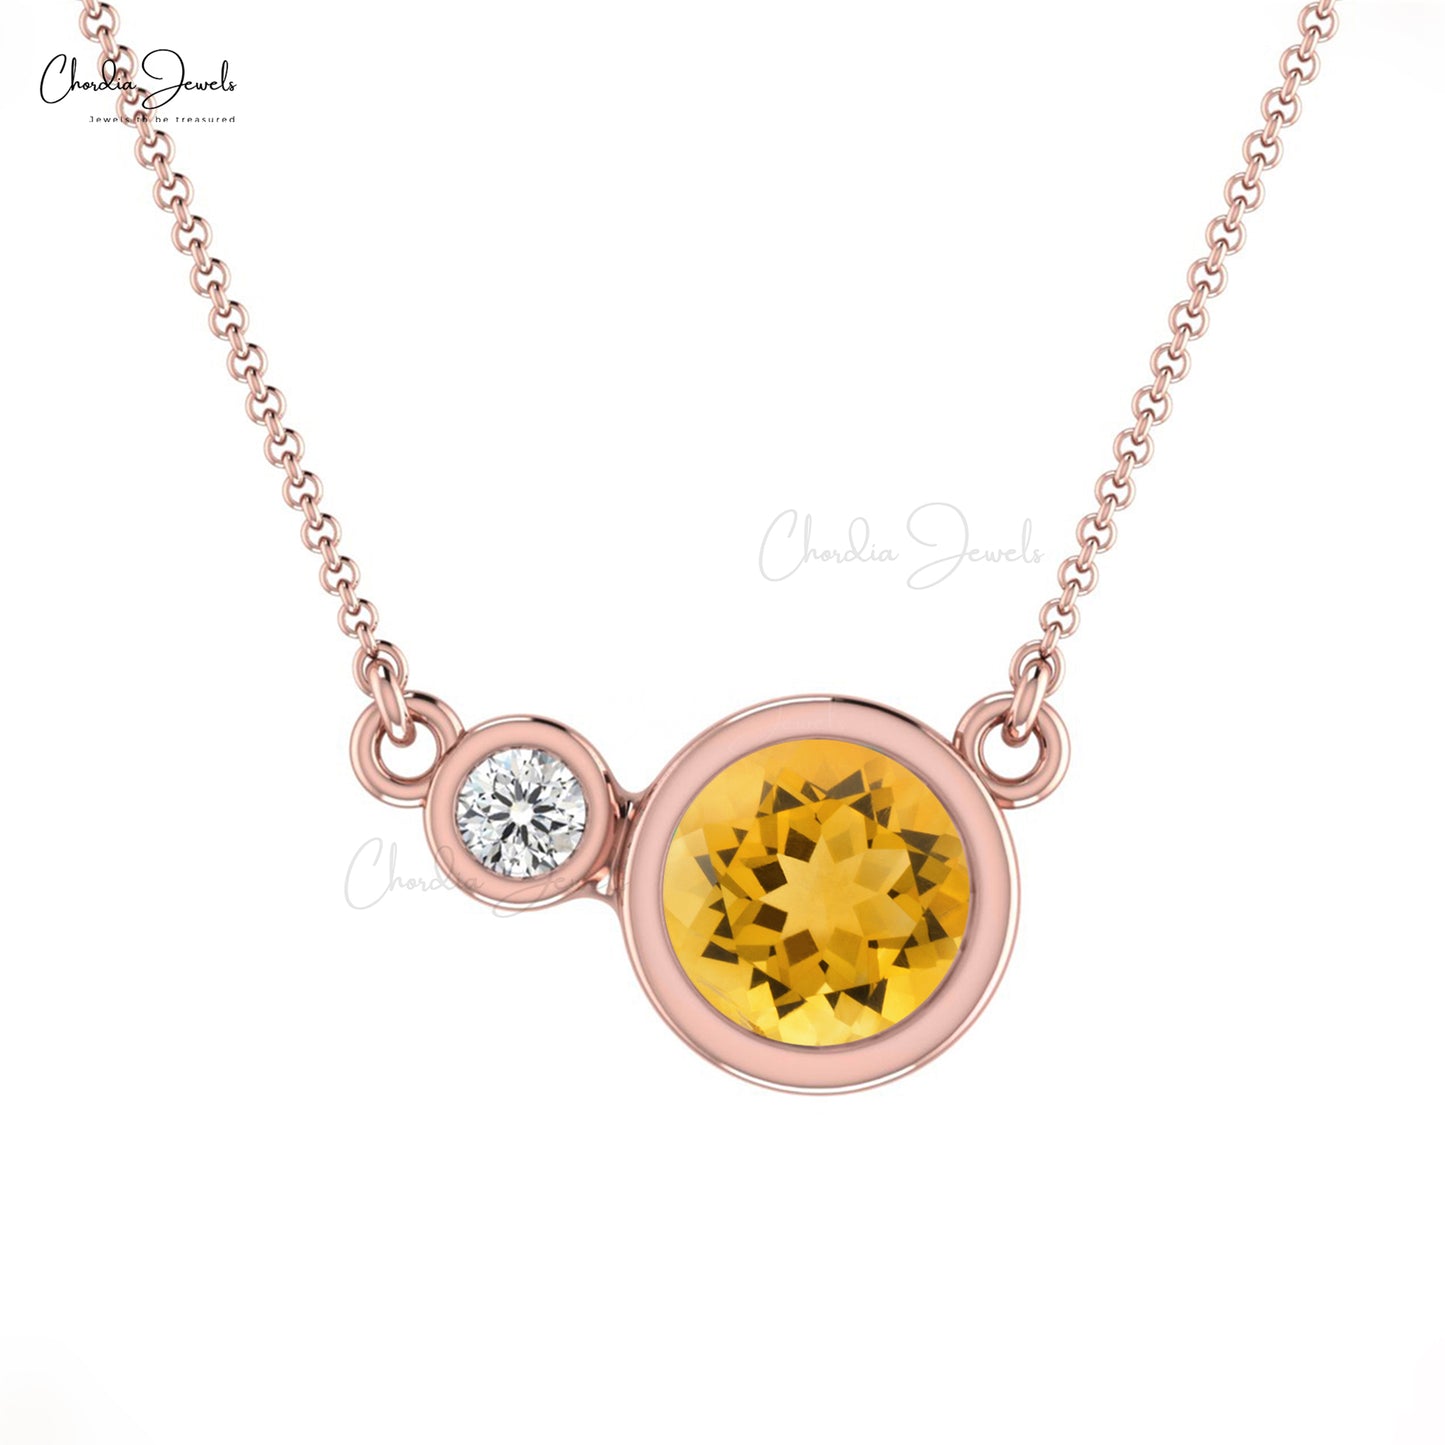 Load image into Gallery viewer, Natural Citrine Necklace, 5mm Round Faceted Gemstone Necklace, November Birthstone Necklace, 14k Solid Gold Diamond Necklace Gift for Her
